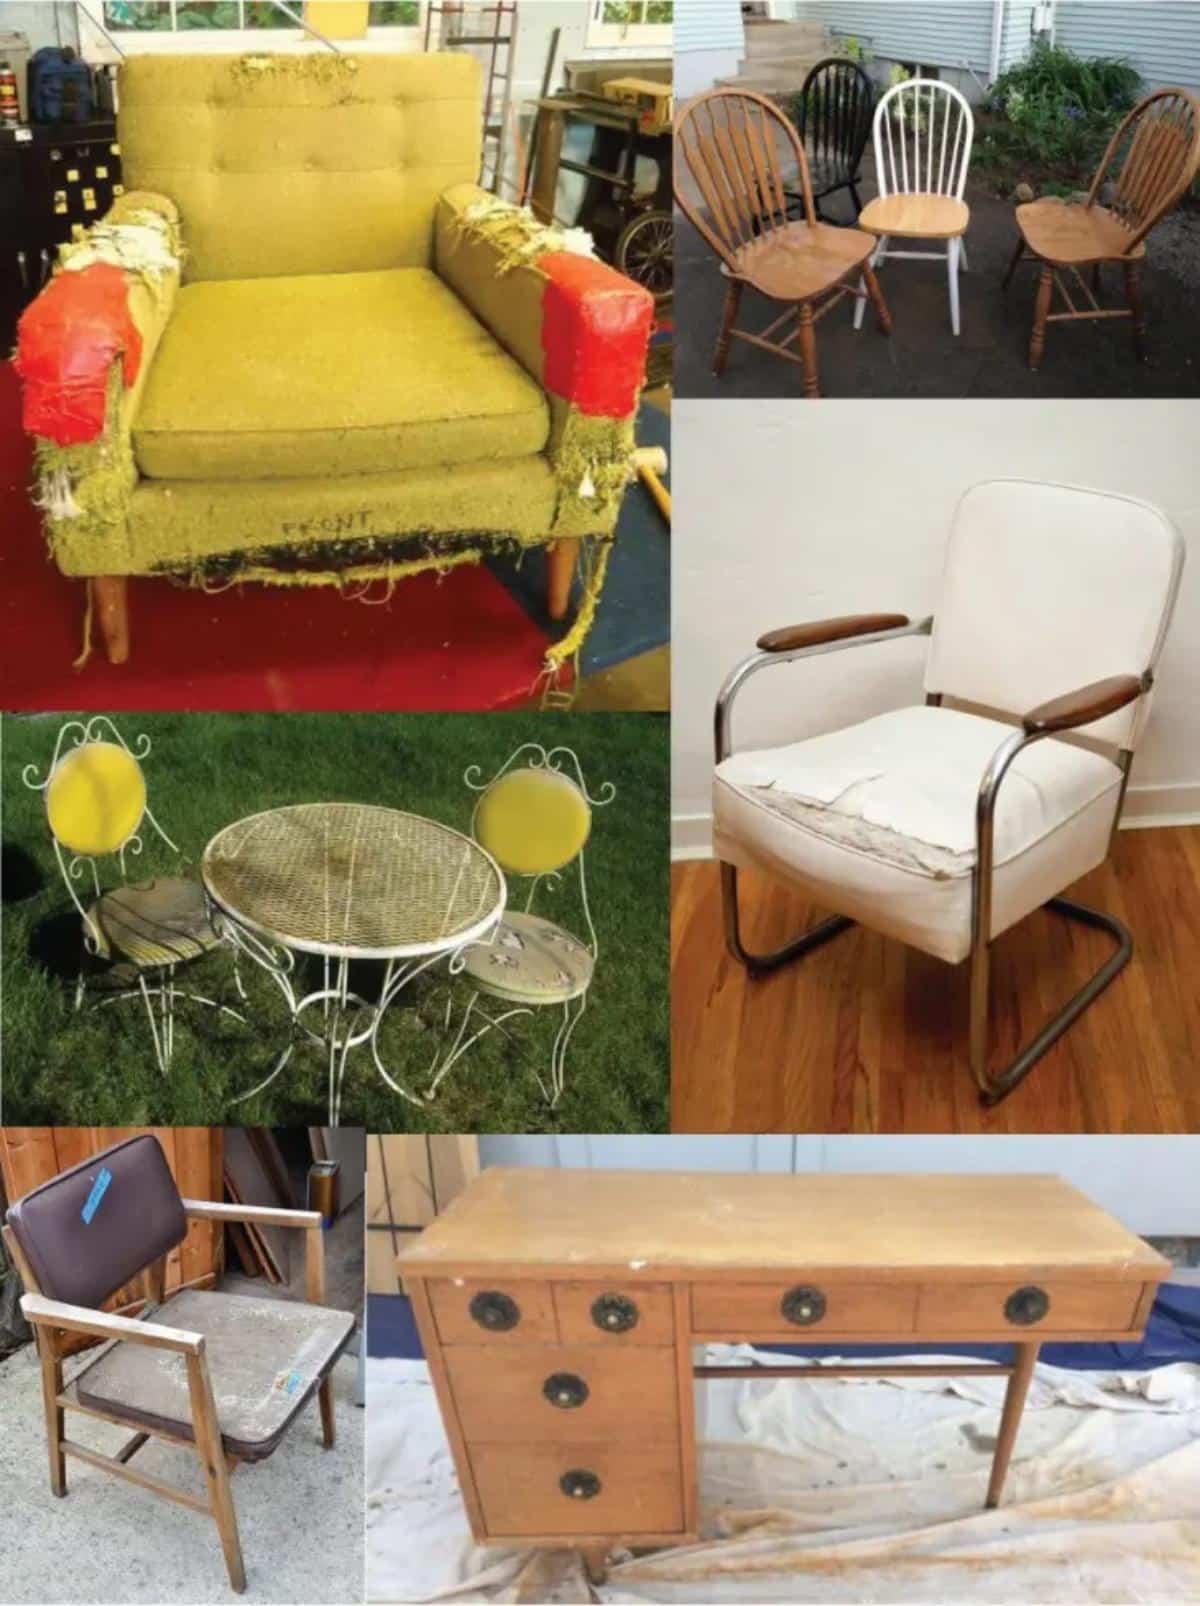 30 Ways To Repair, Restore, Or Redo Any Piece Of Furniture collage.